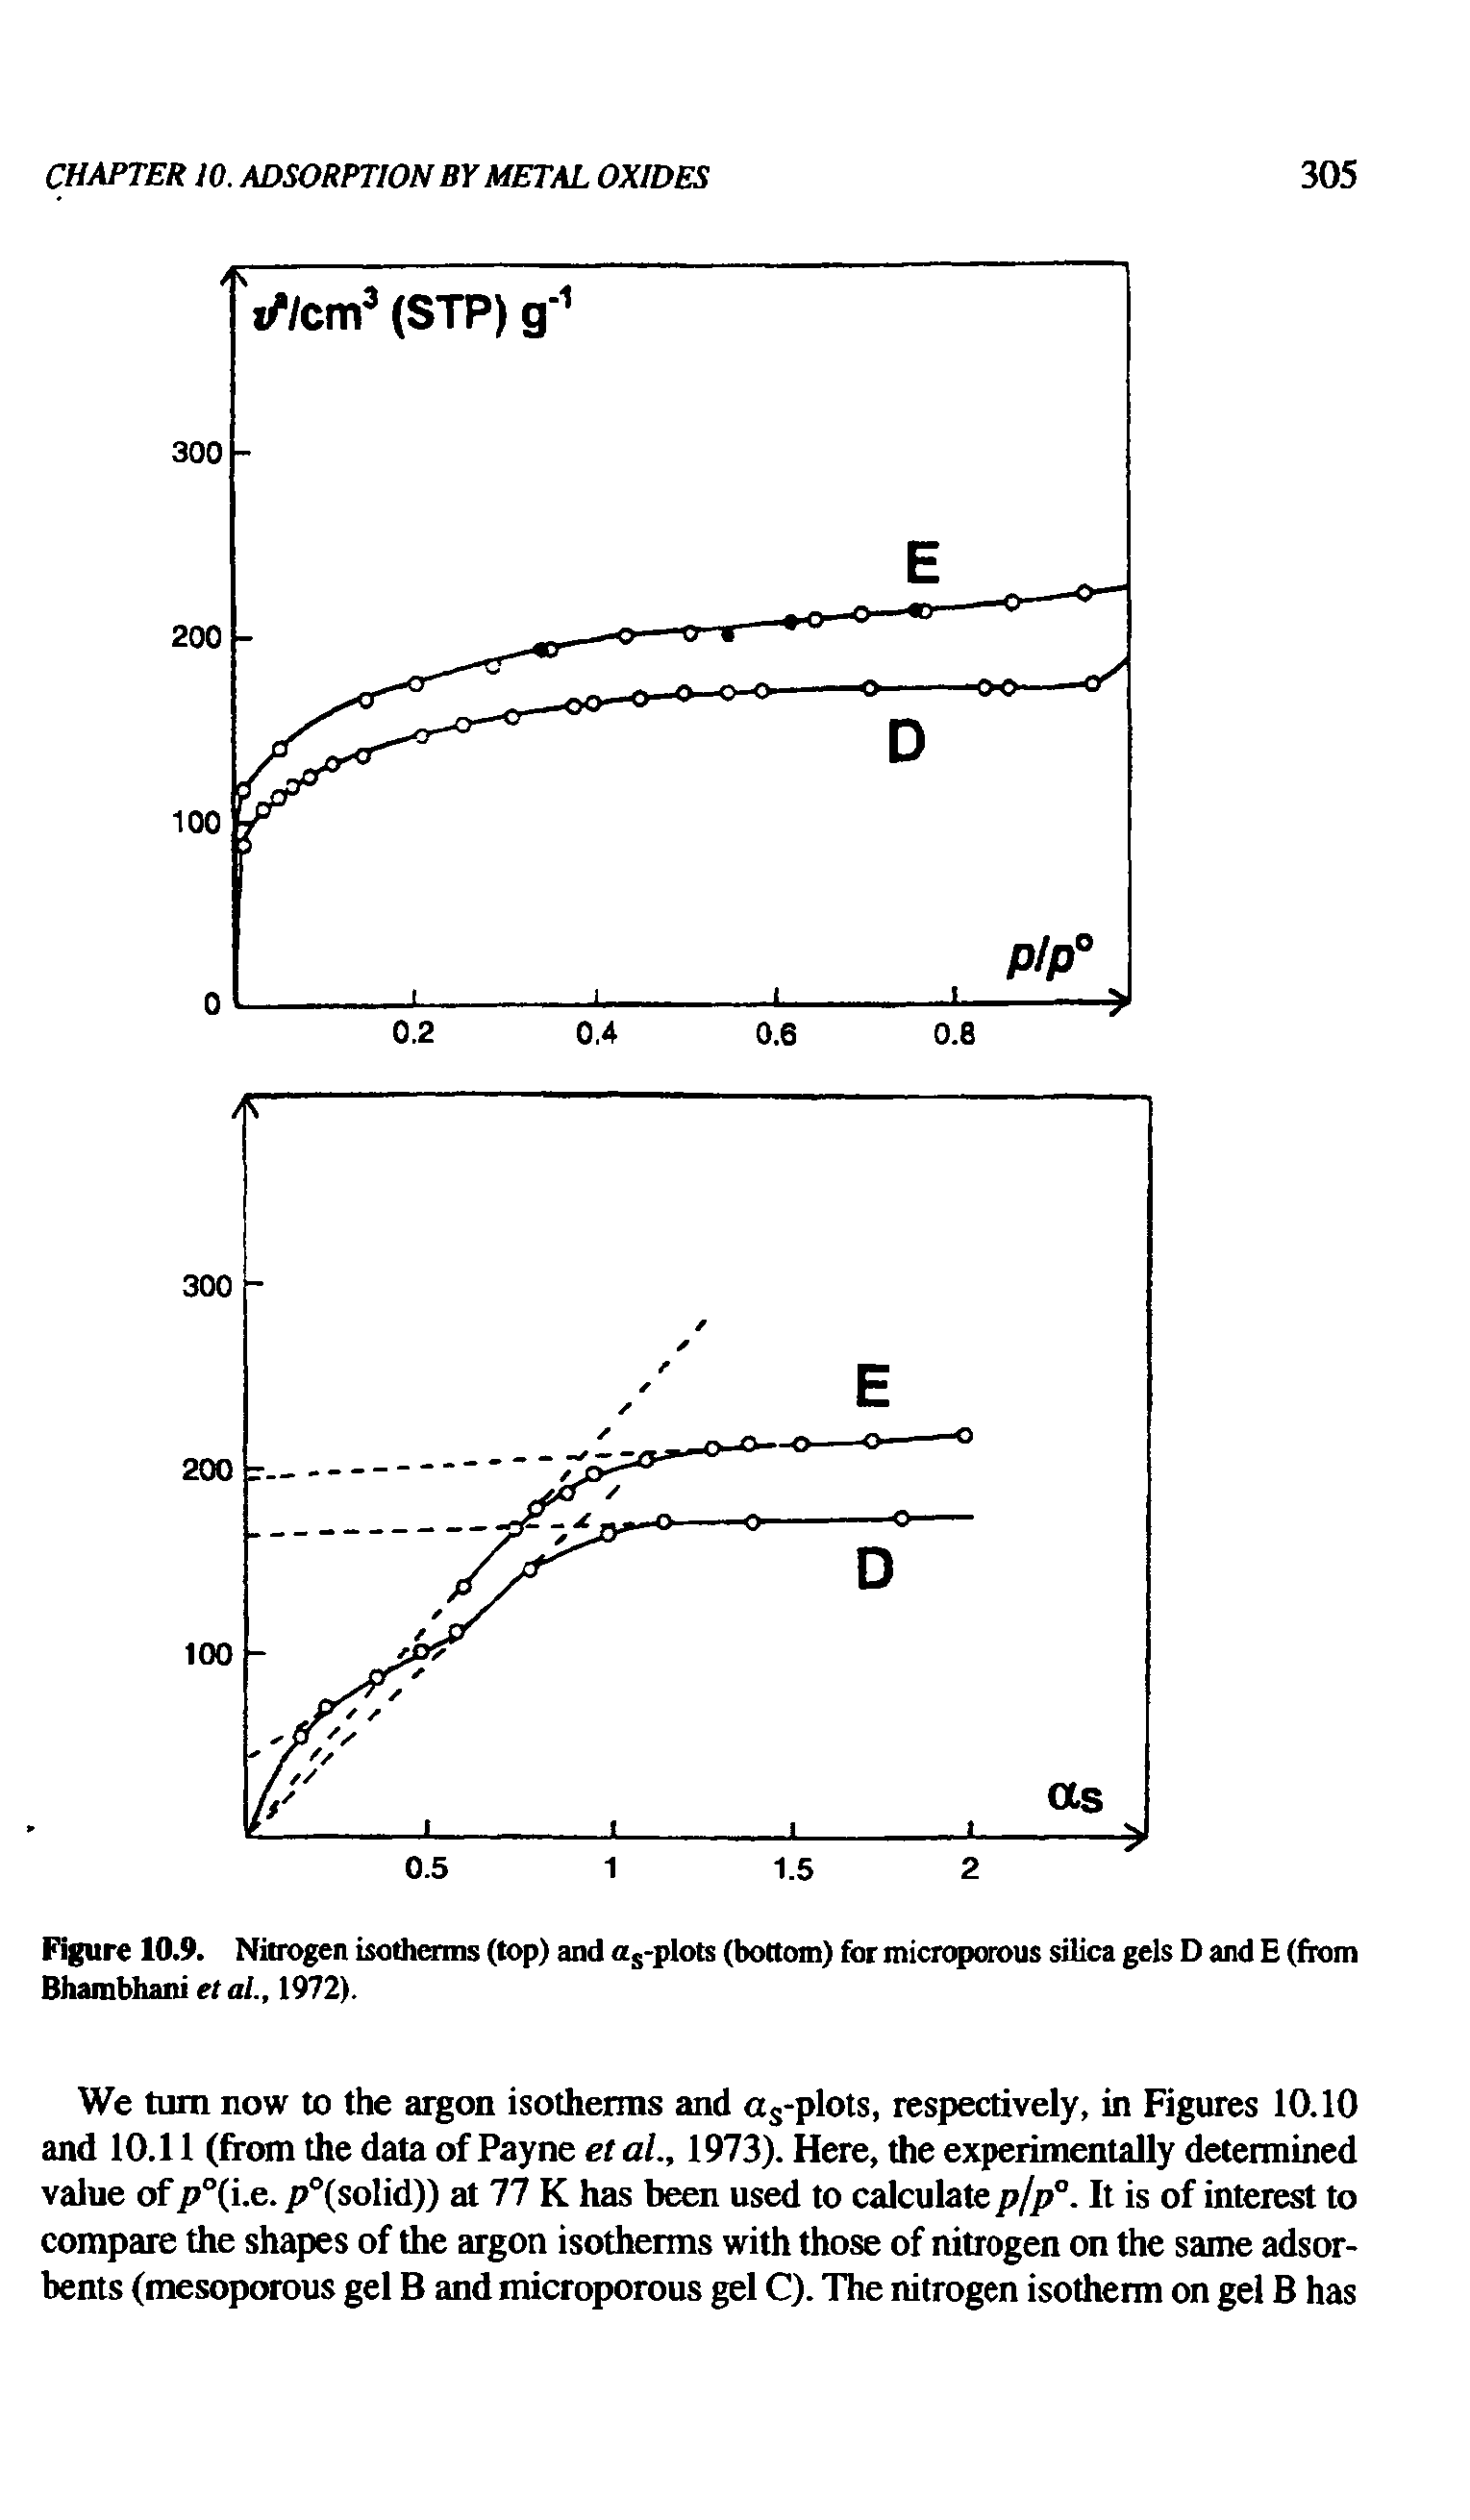 Figure 10.9. Nitrogen isotherms (top) and as-plots (bottom) for microporous silica gels D and E (from Bhambhani et al., 1972).